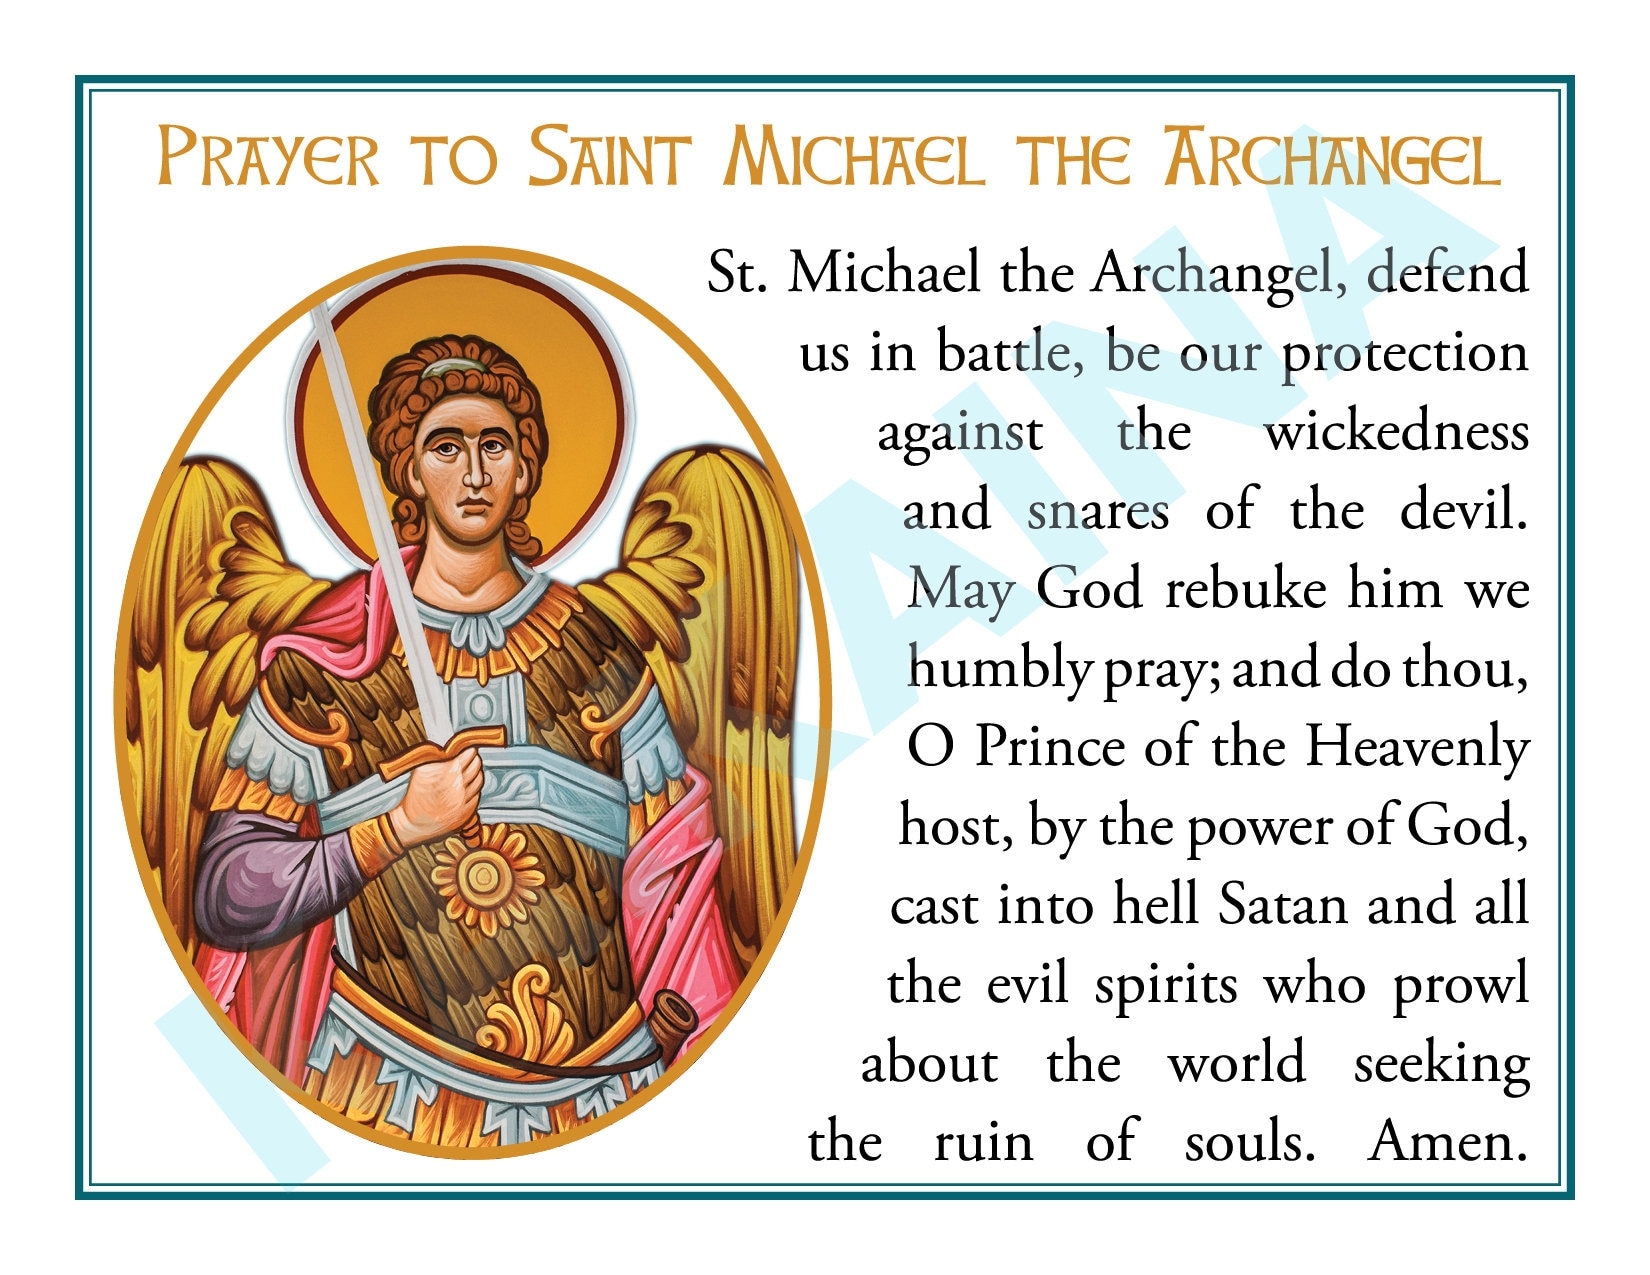 Saint Michael The Archangel Downloadable And Printable Prayer Card 4 up A Page Catholic Prayer Card Etsy